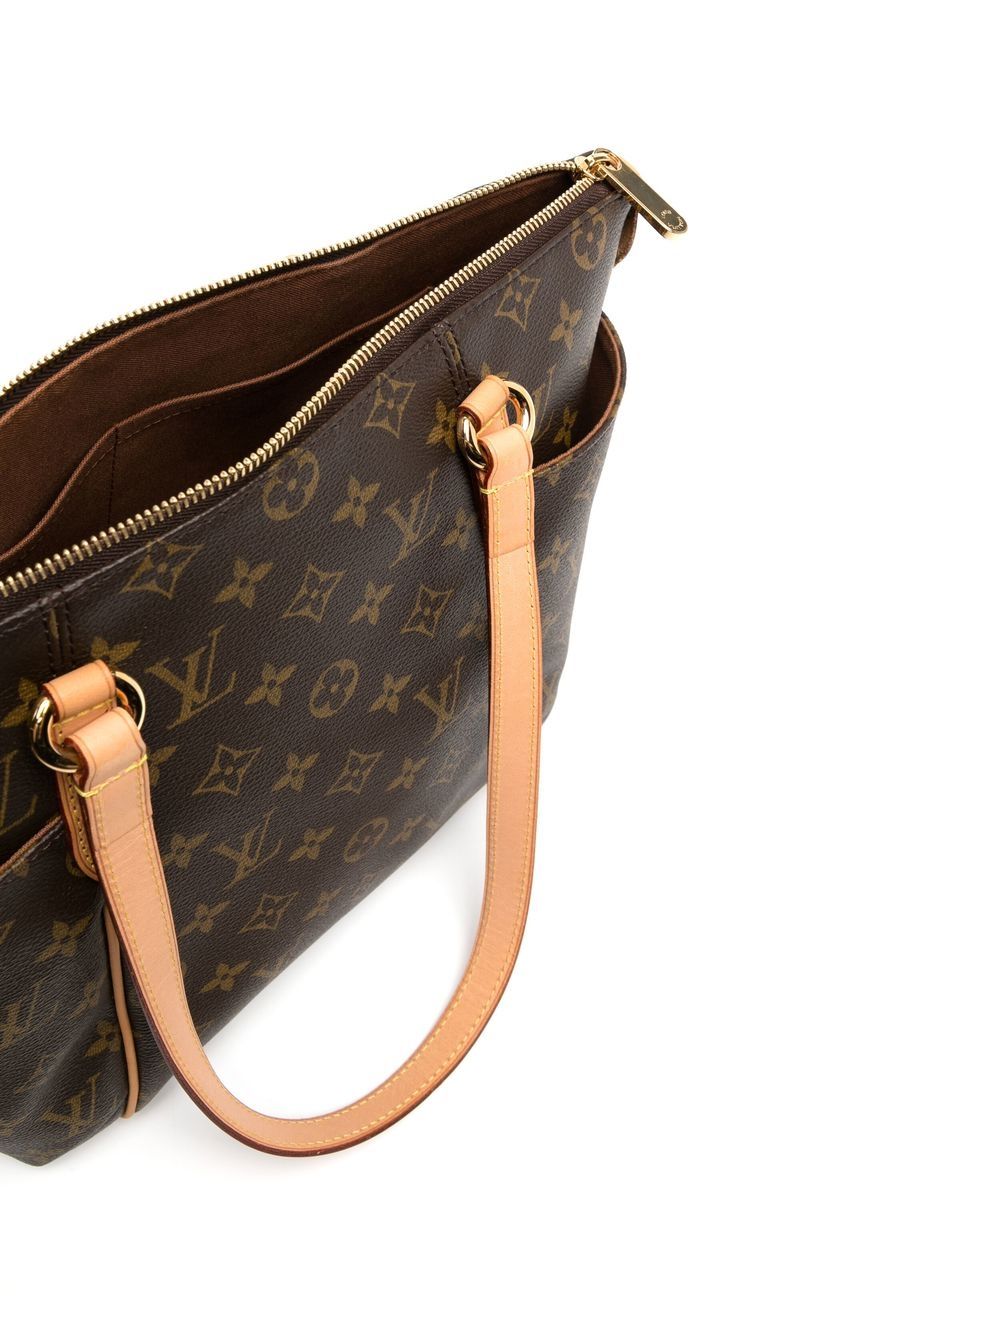 Louis Vuitton On My Side PM Camel Brown Leather/Canvas Shoulder